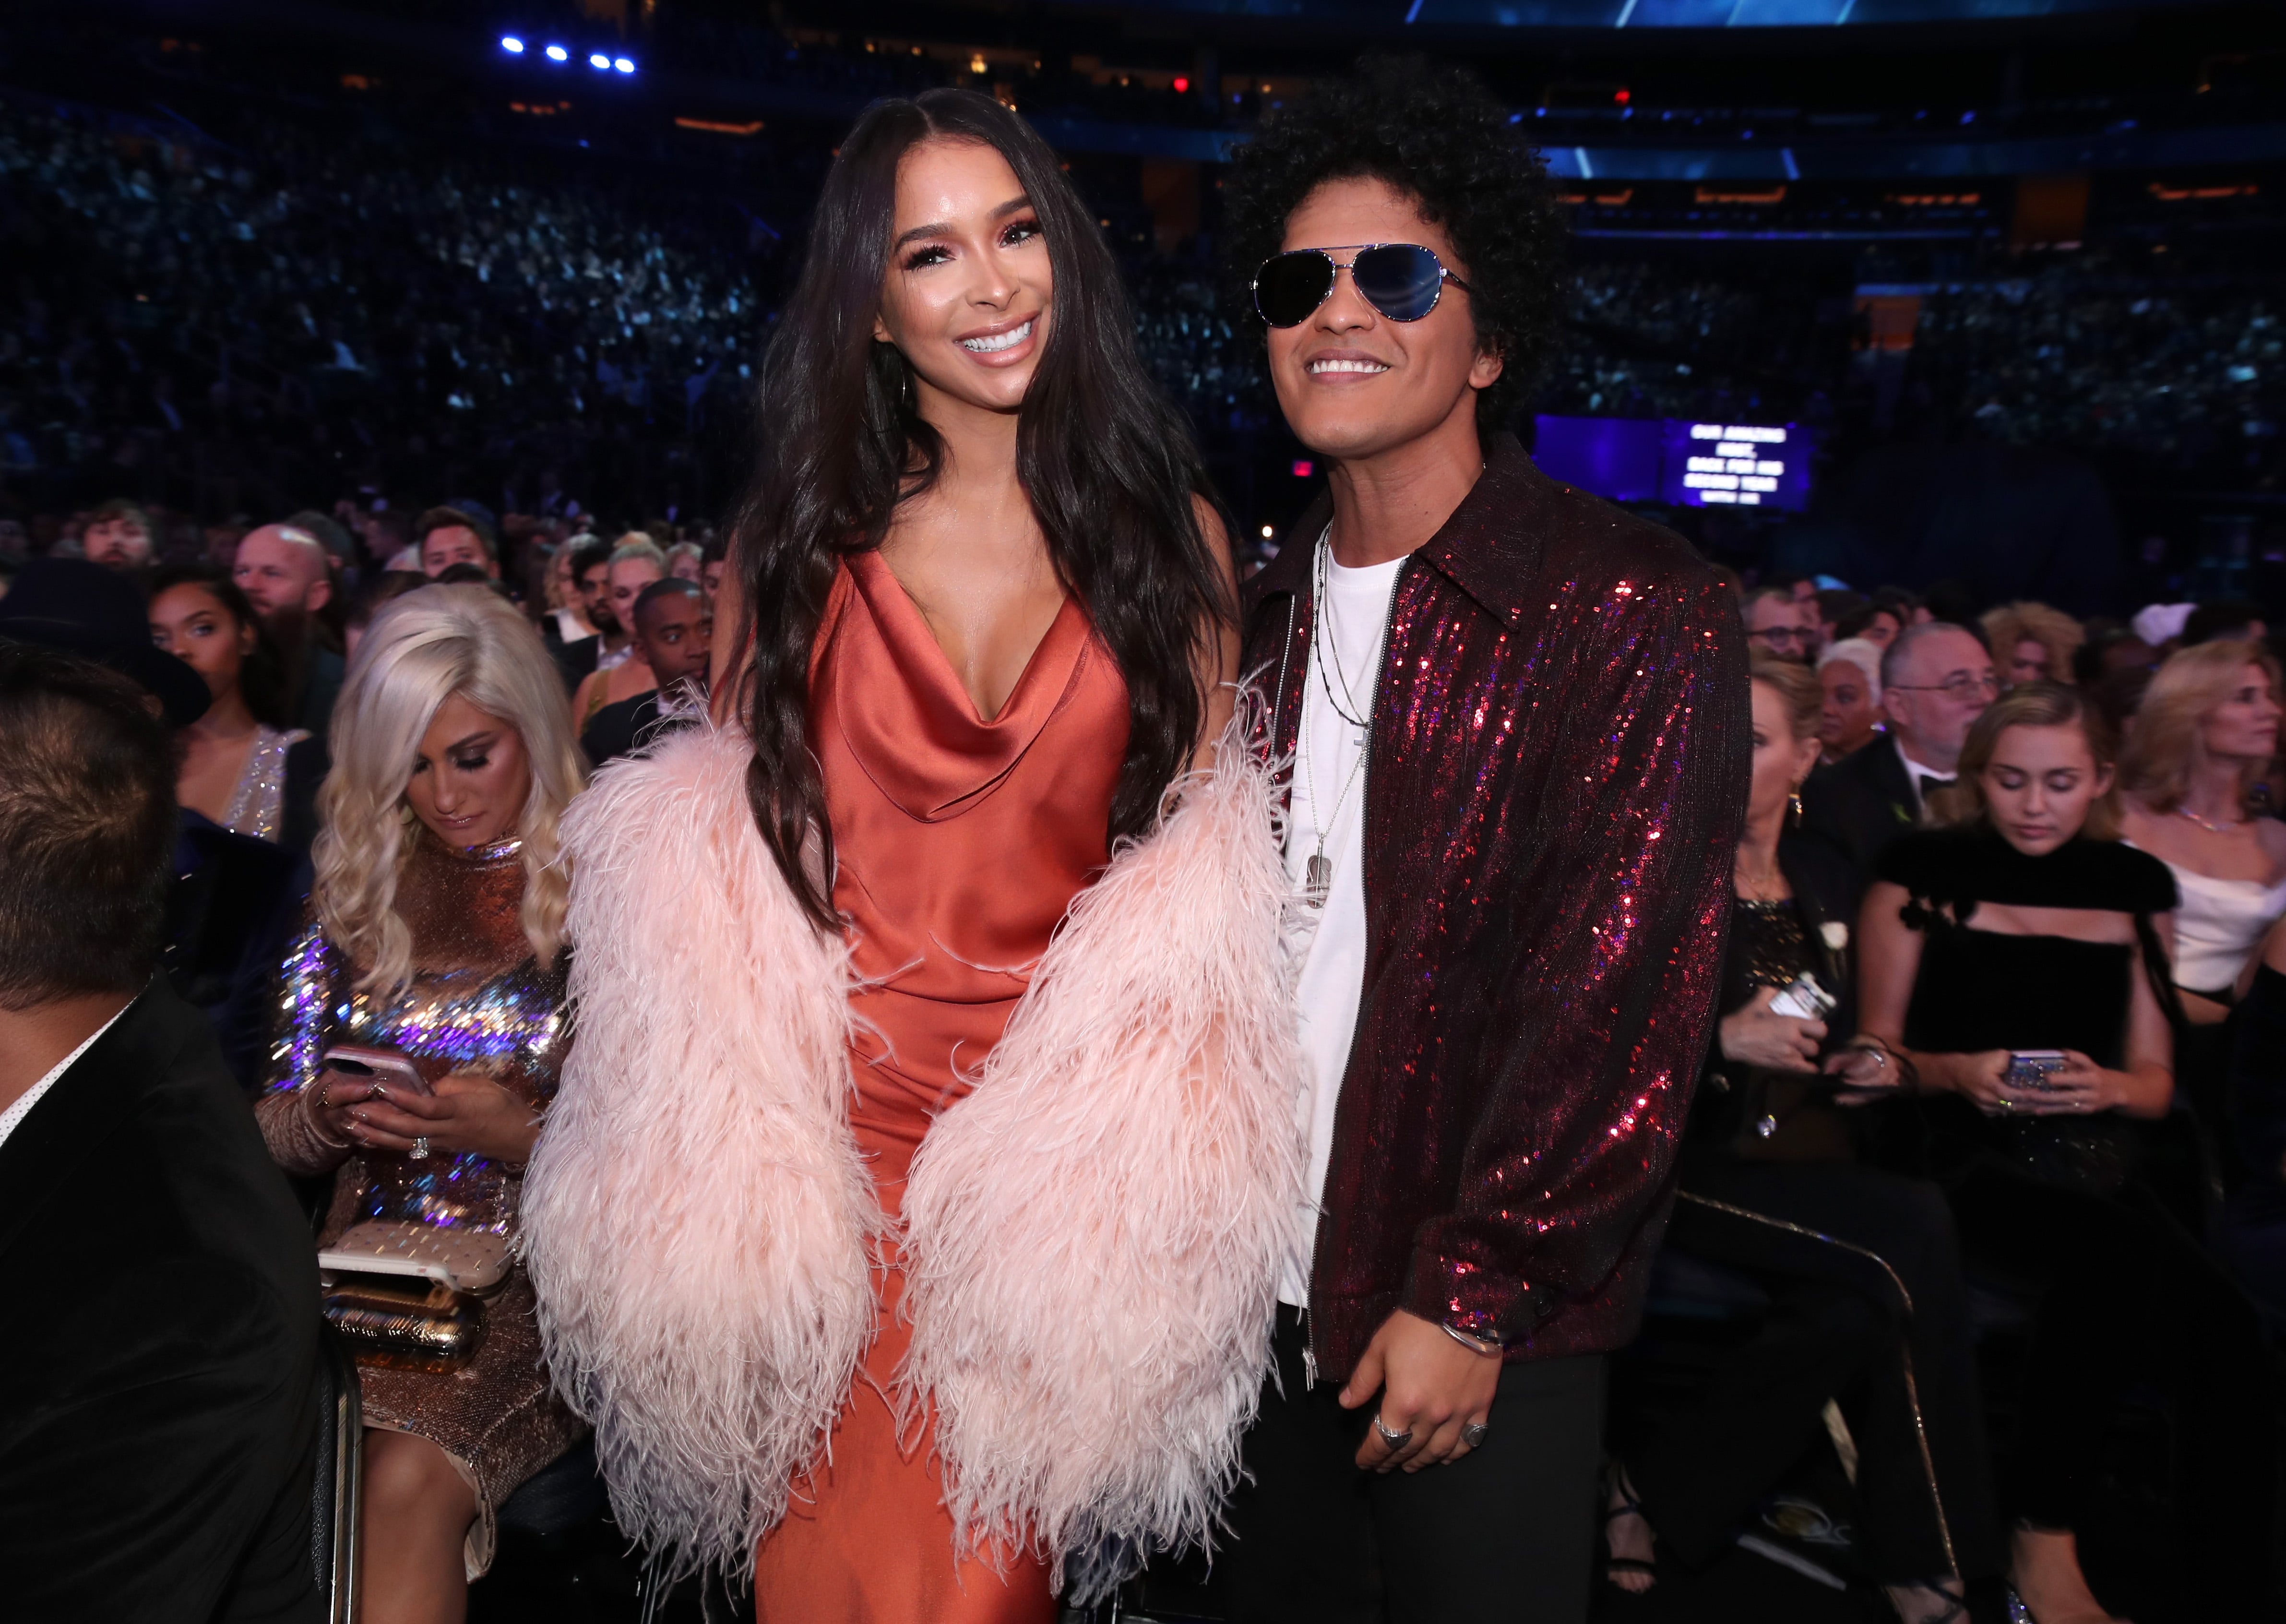 Who is Bruno Mars' Girlfriend? All About Jessica Caban